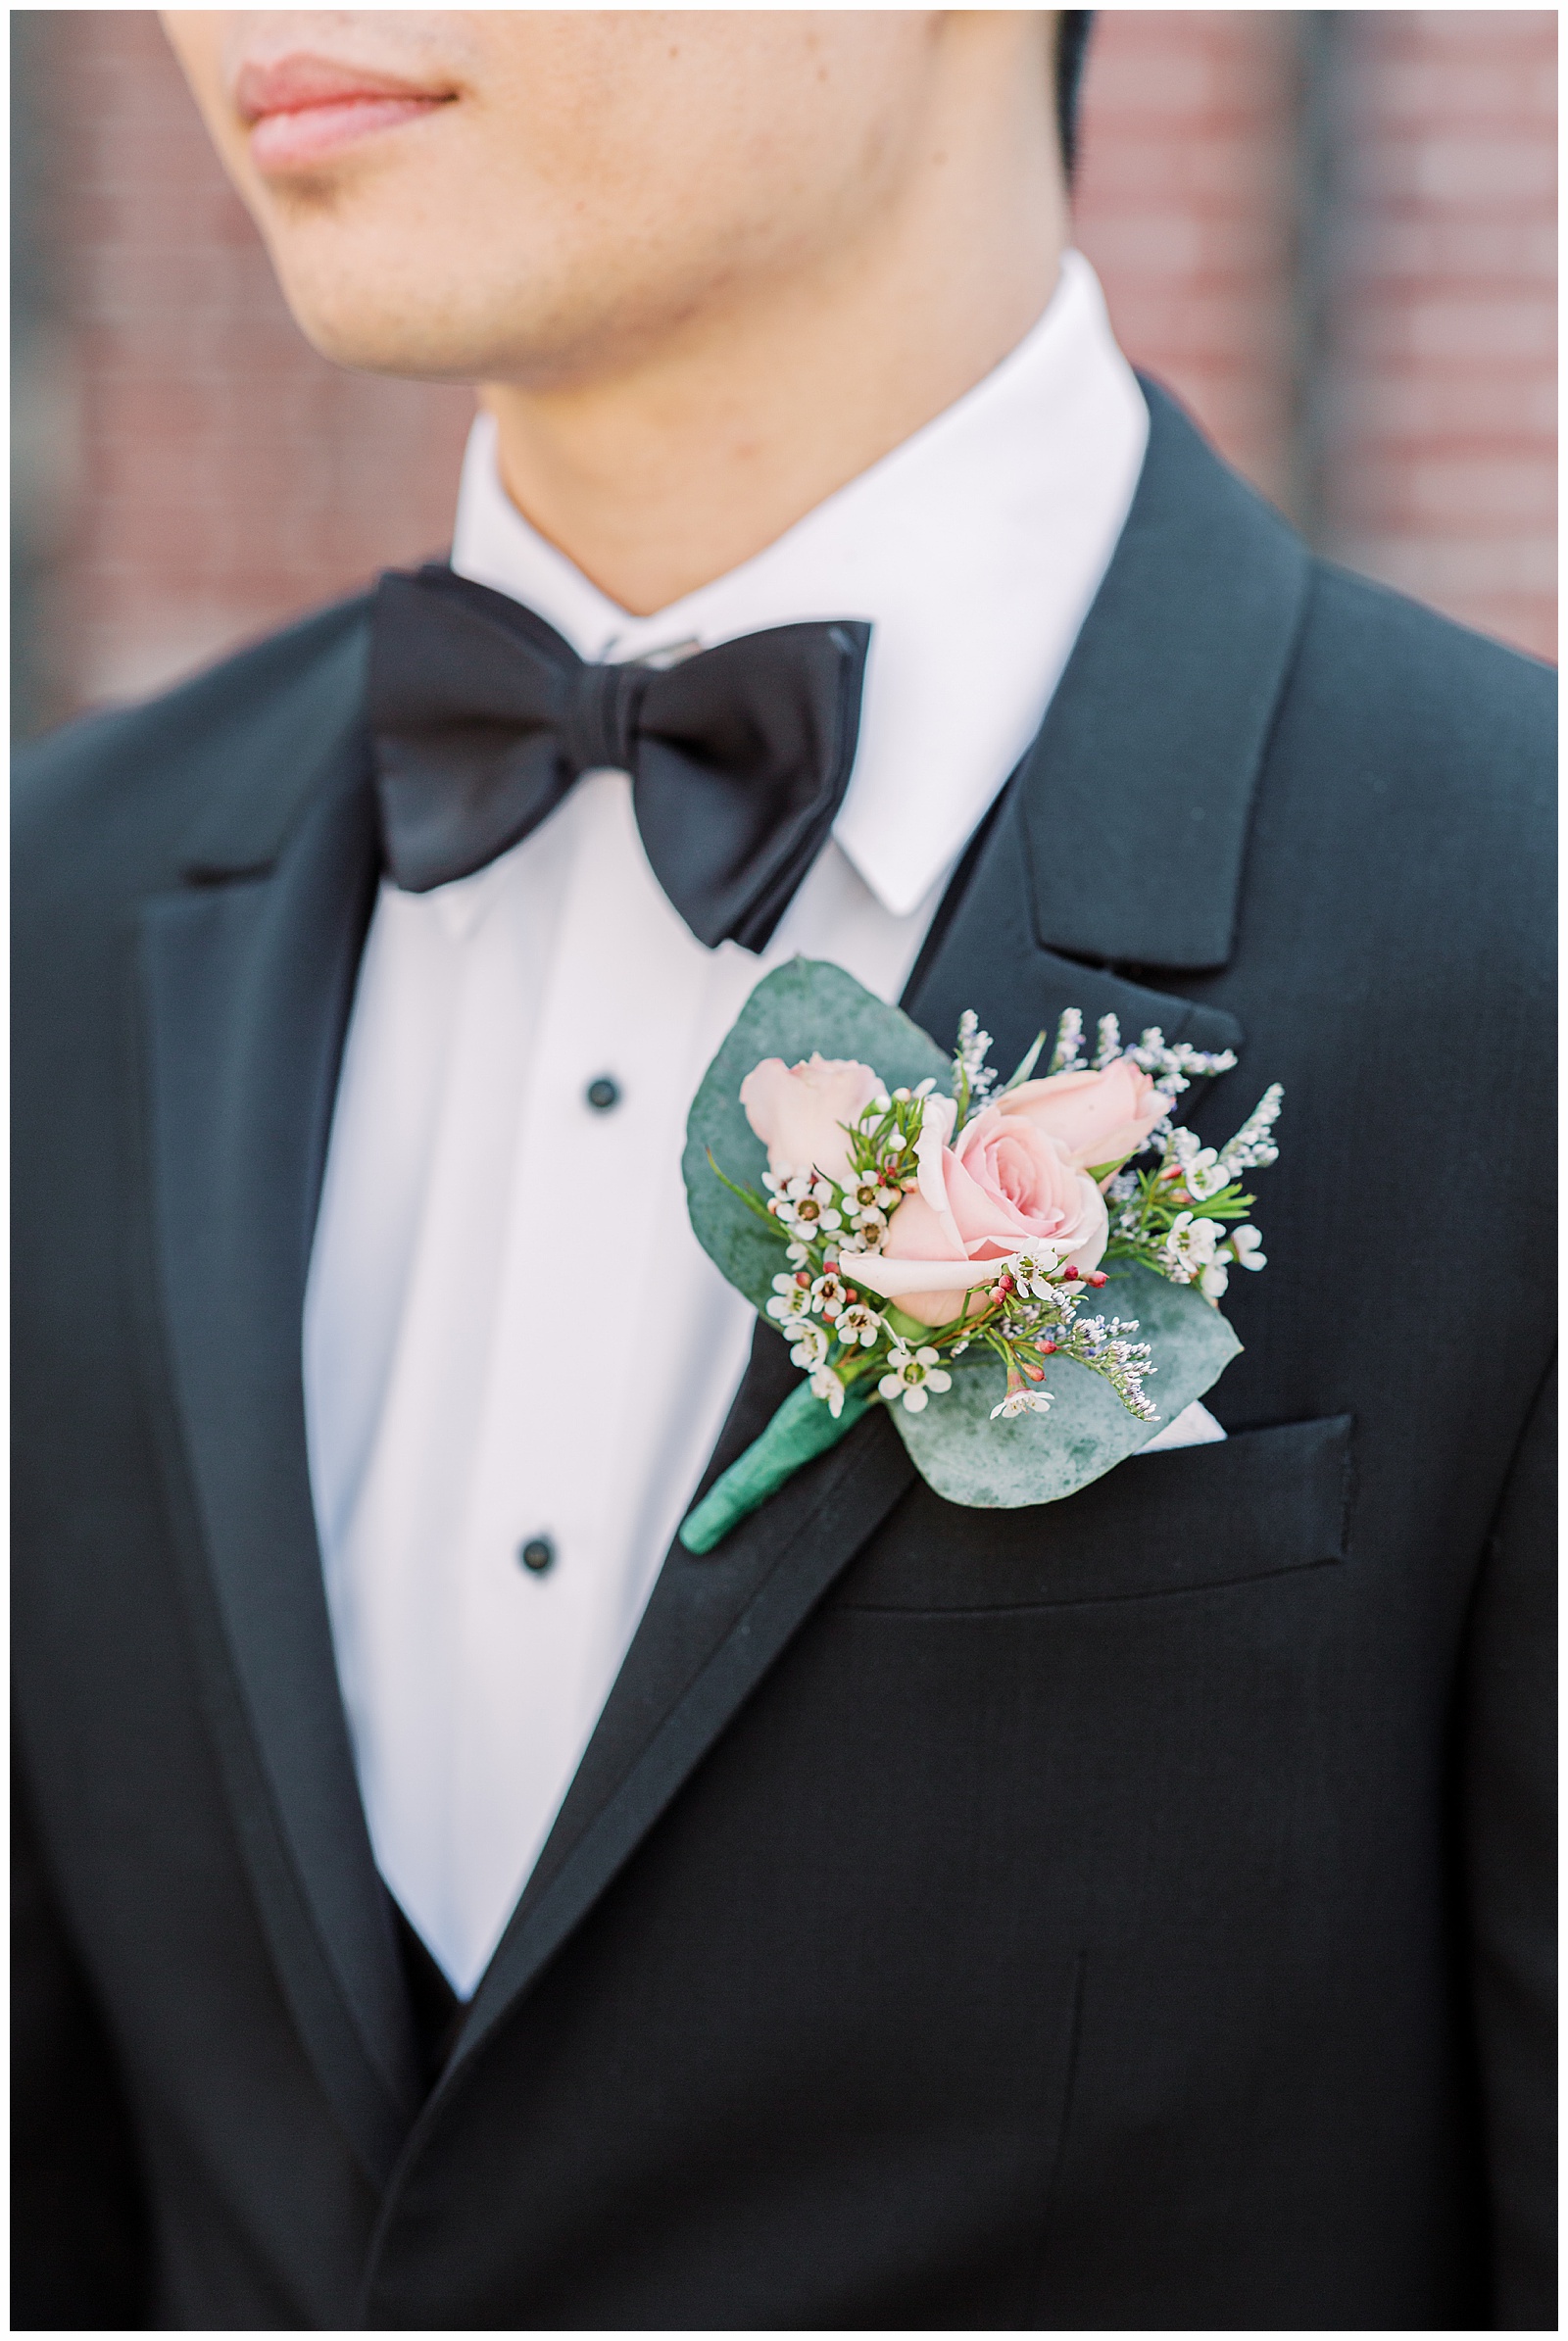 Wes' boutonniere